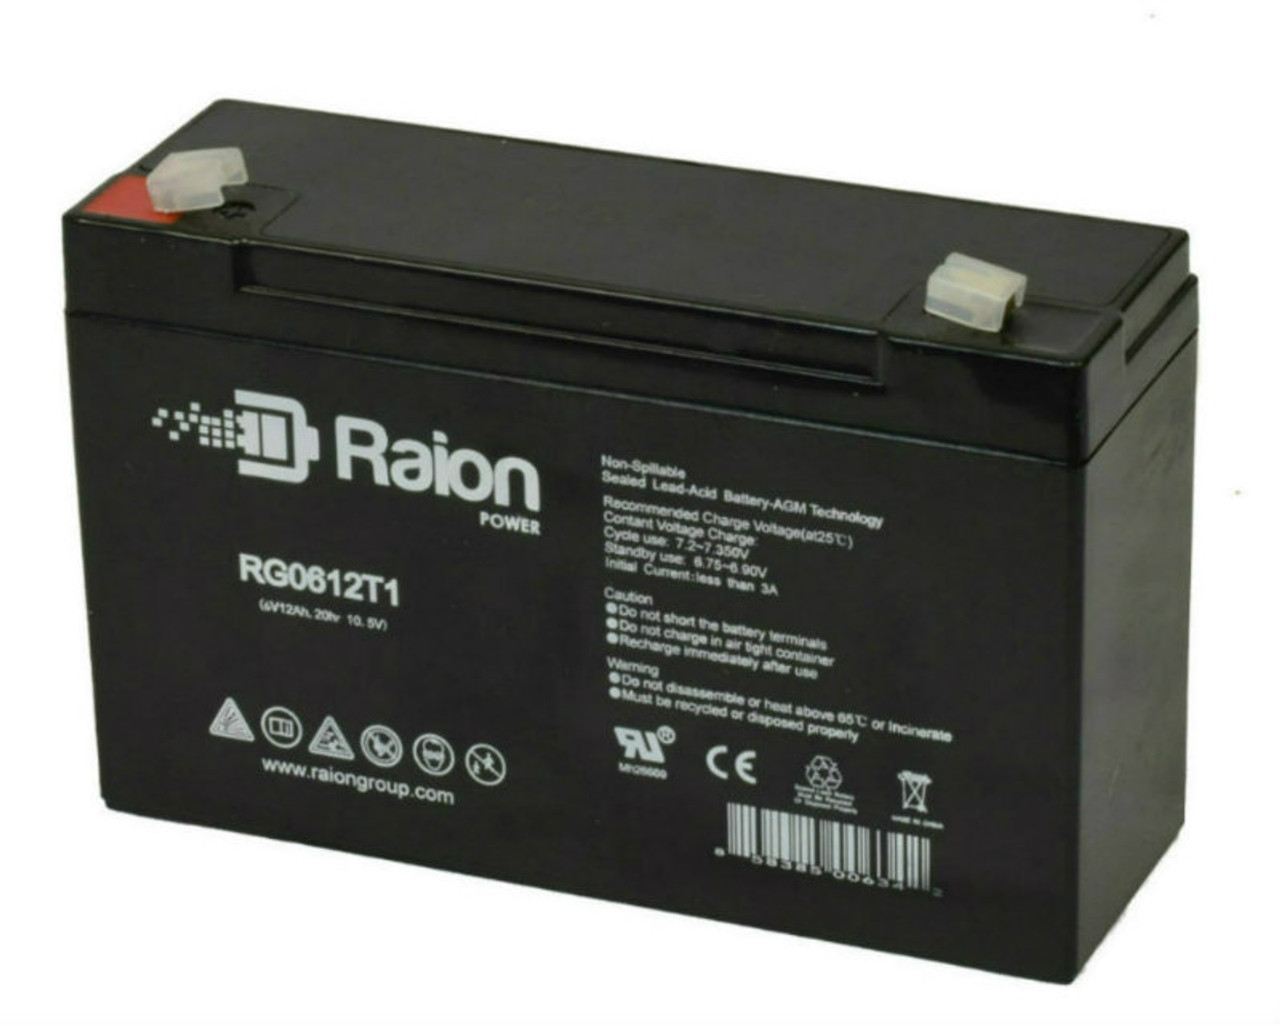 Raion Power RG06120T1 Replacement Battery for Zeus Battery PC12-6F1